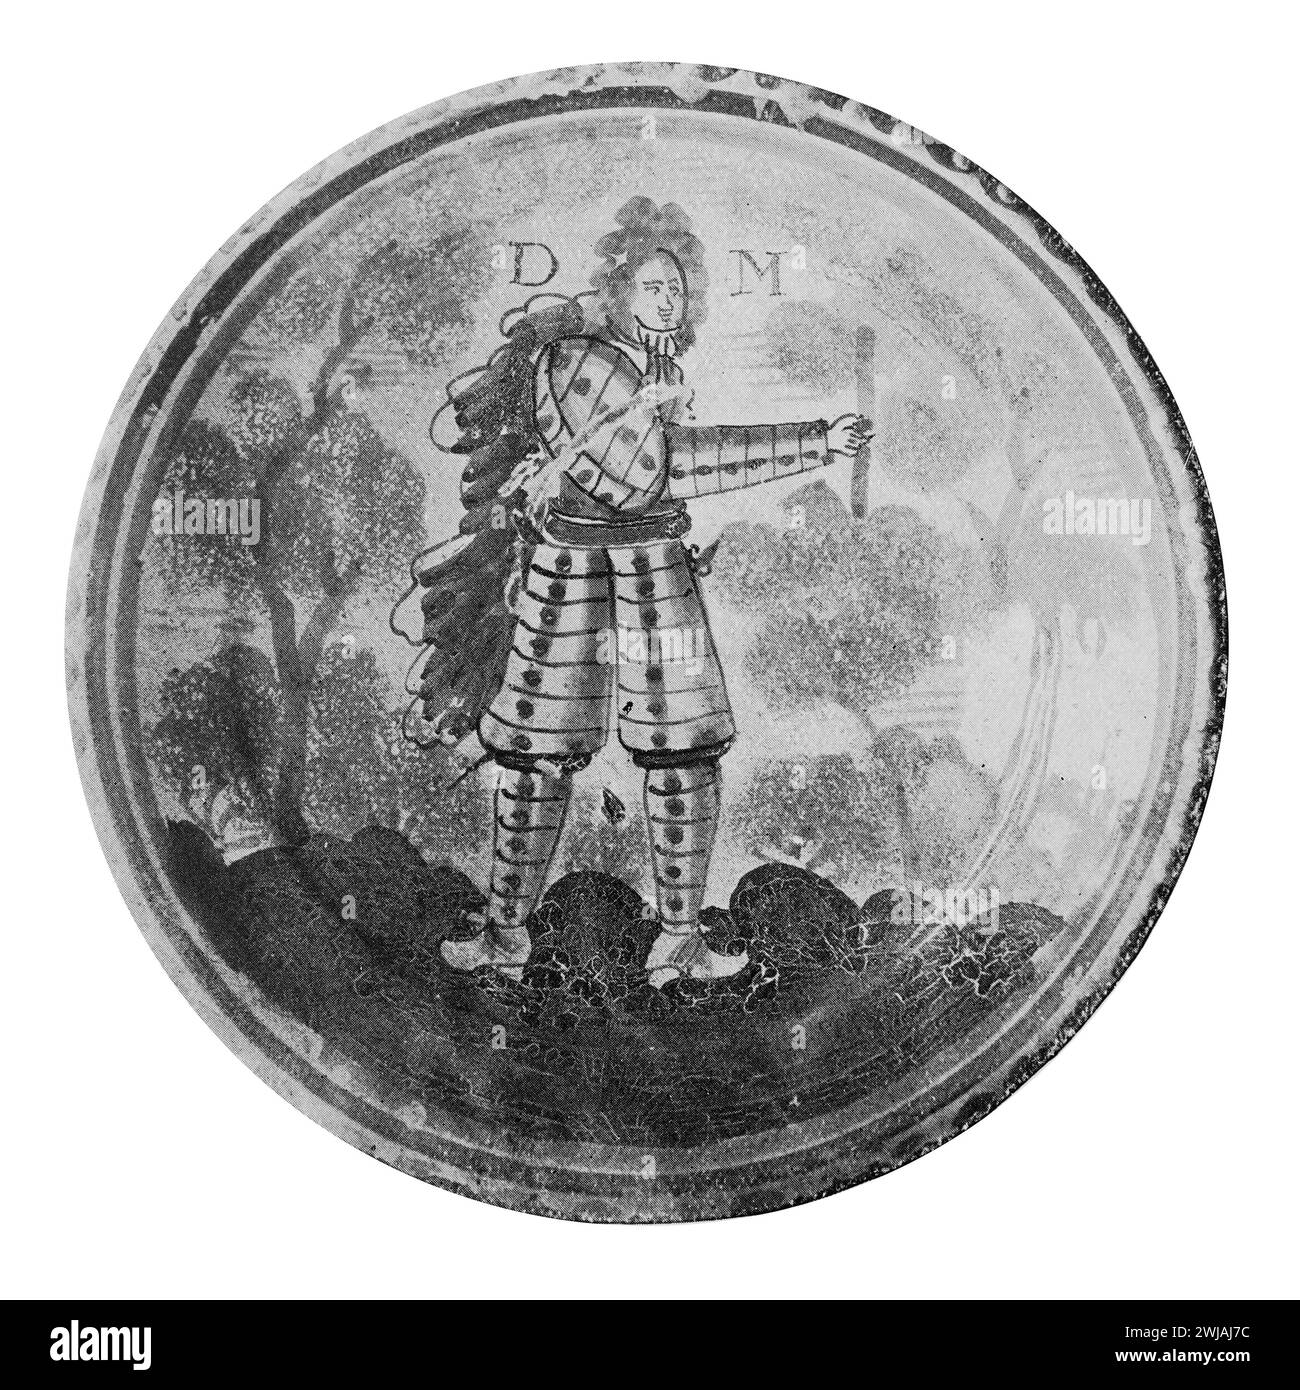 An old English Delft plate with a painting of the Duke of Marlborough. 17th century. Black and White Illustration from the Connoisseur, an Illustrated Magazine for Collectors Voll 3 (May-Aug 1902) published in London. Stock Photo